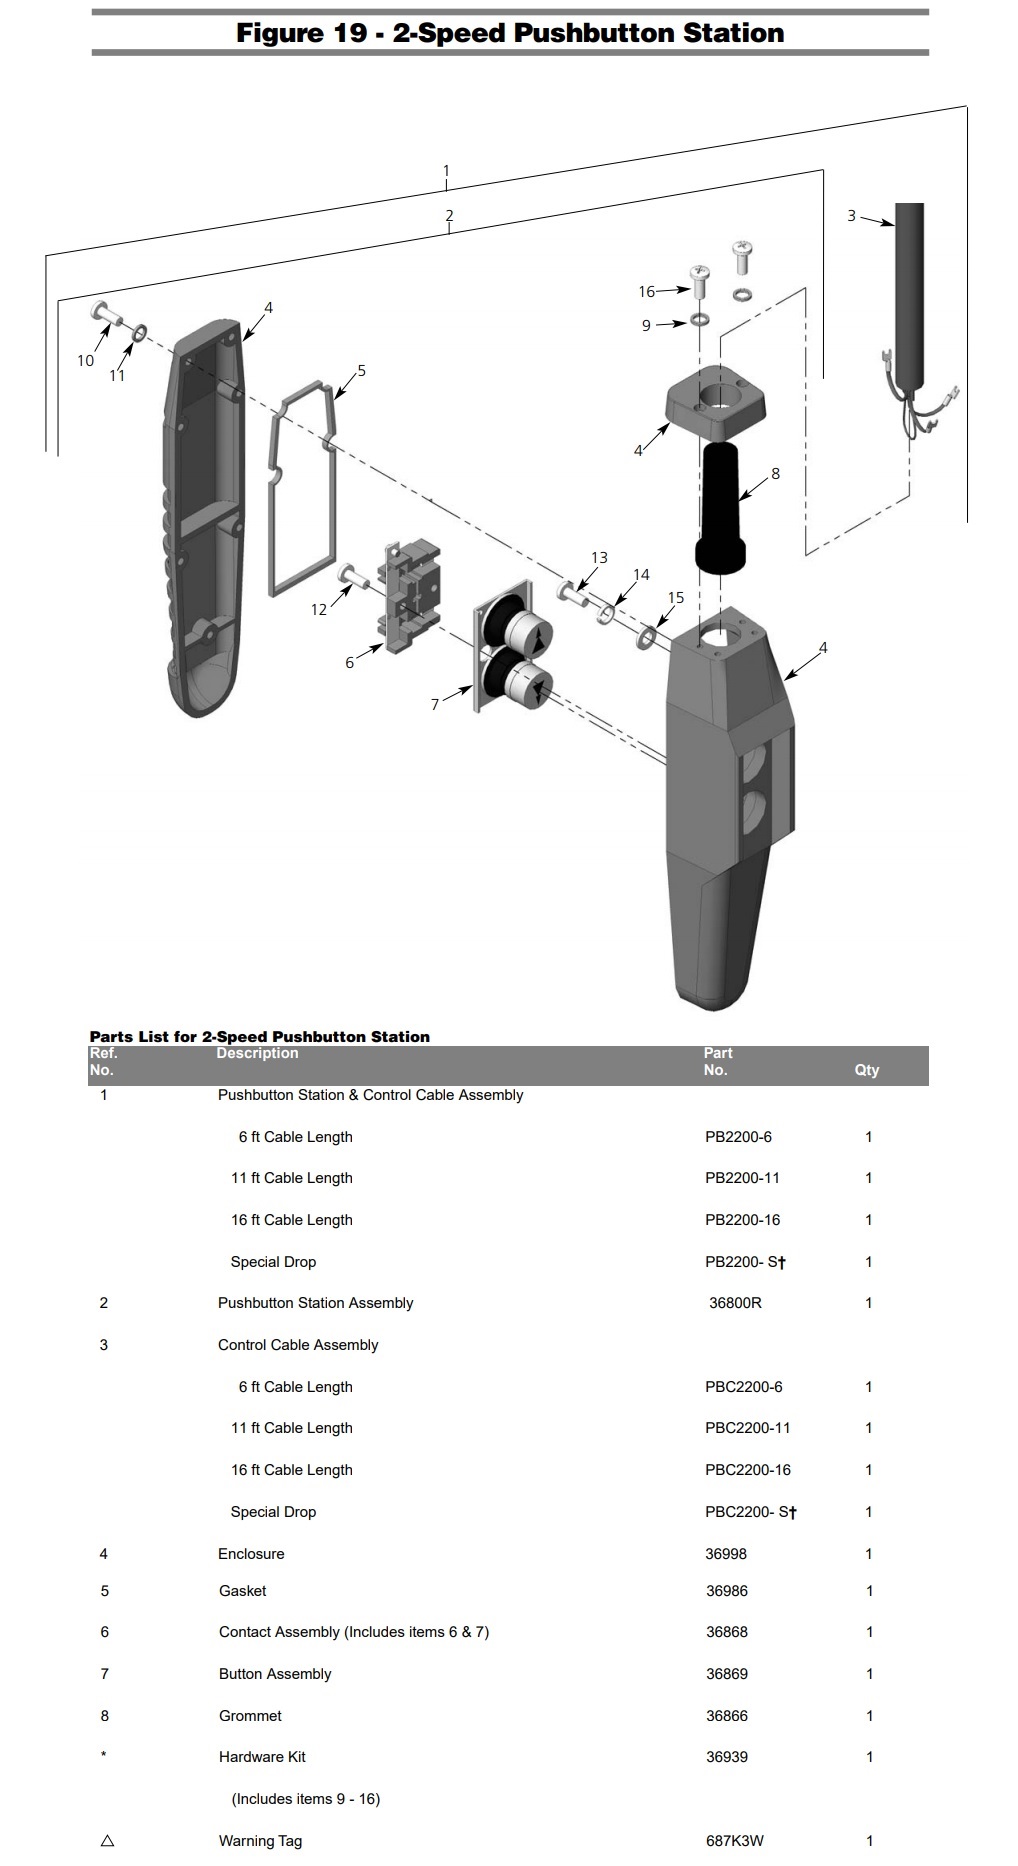 Figure 19 - Coffing JLC 2-Speed Pushbutton Station Diagram and Parts List